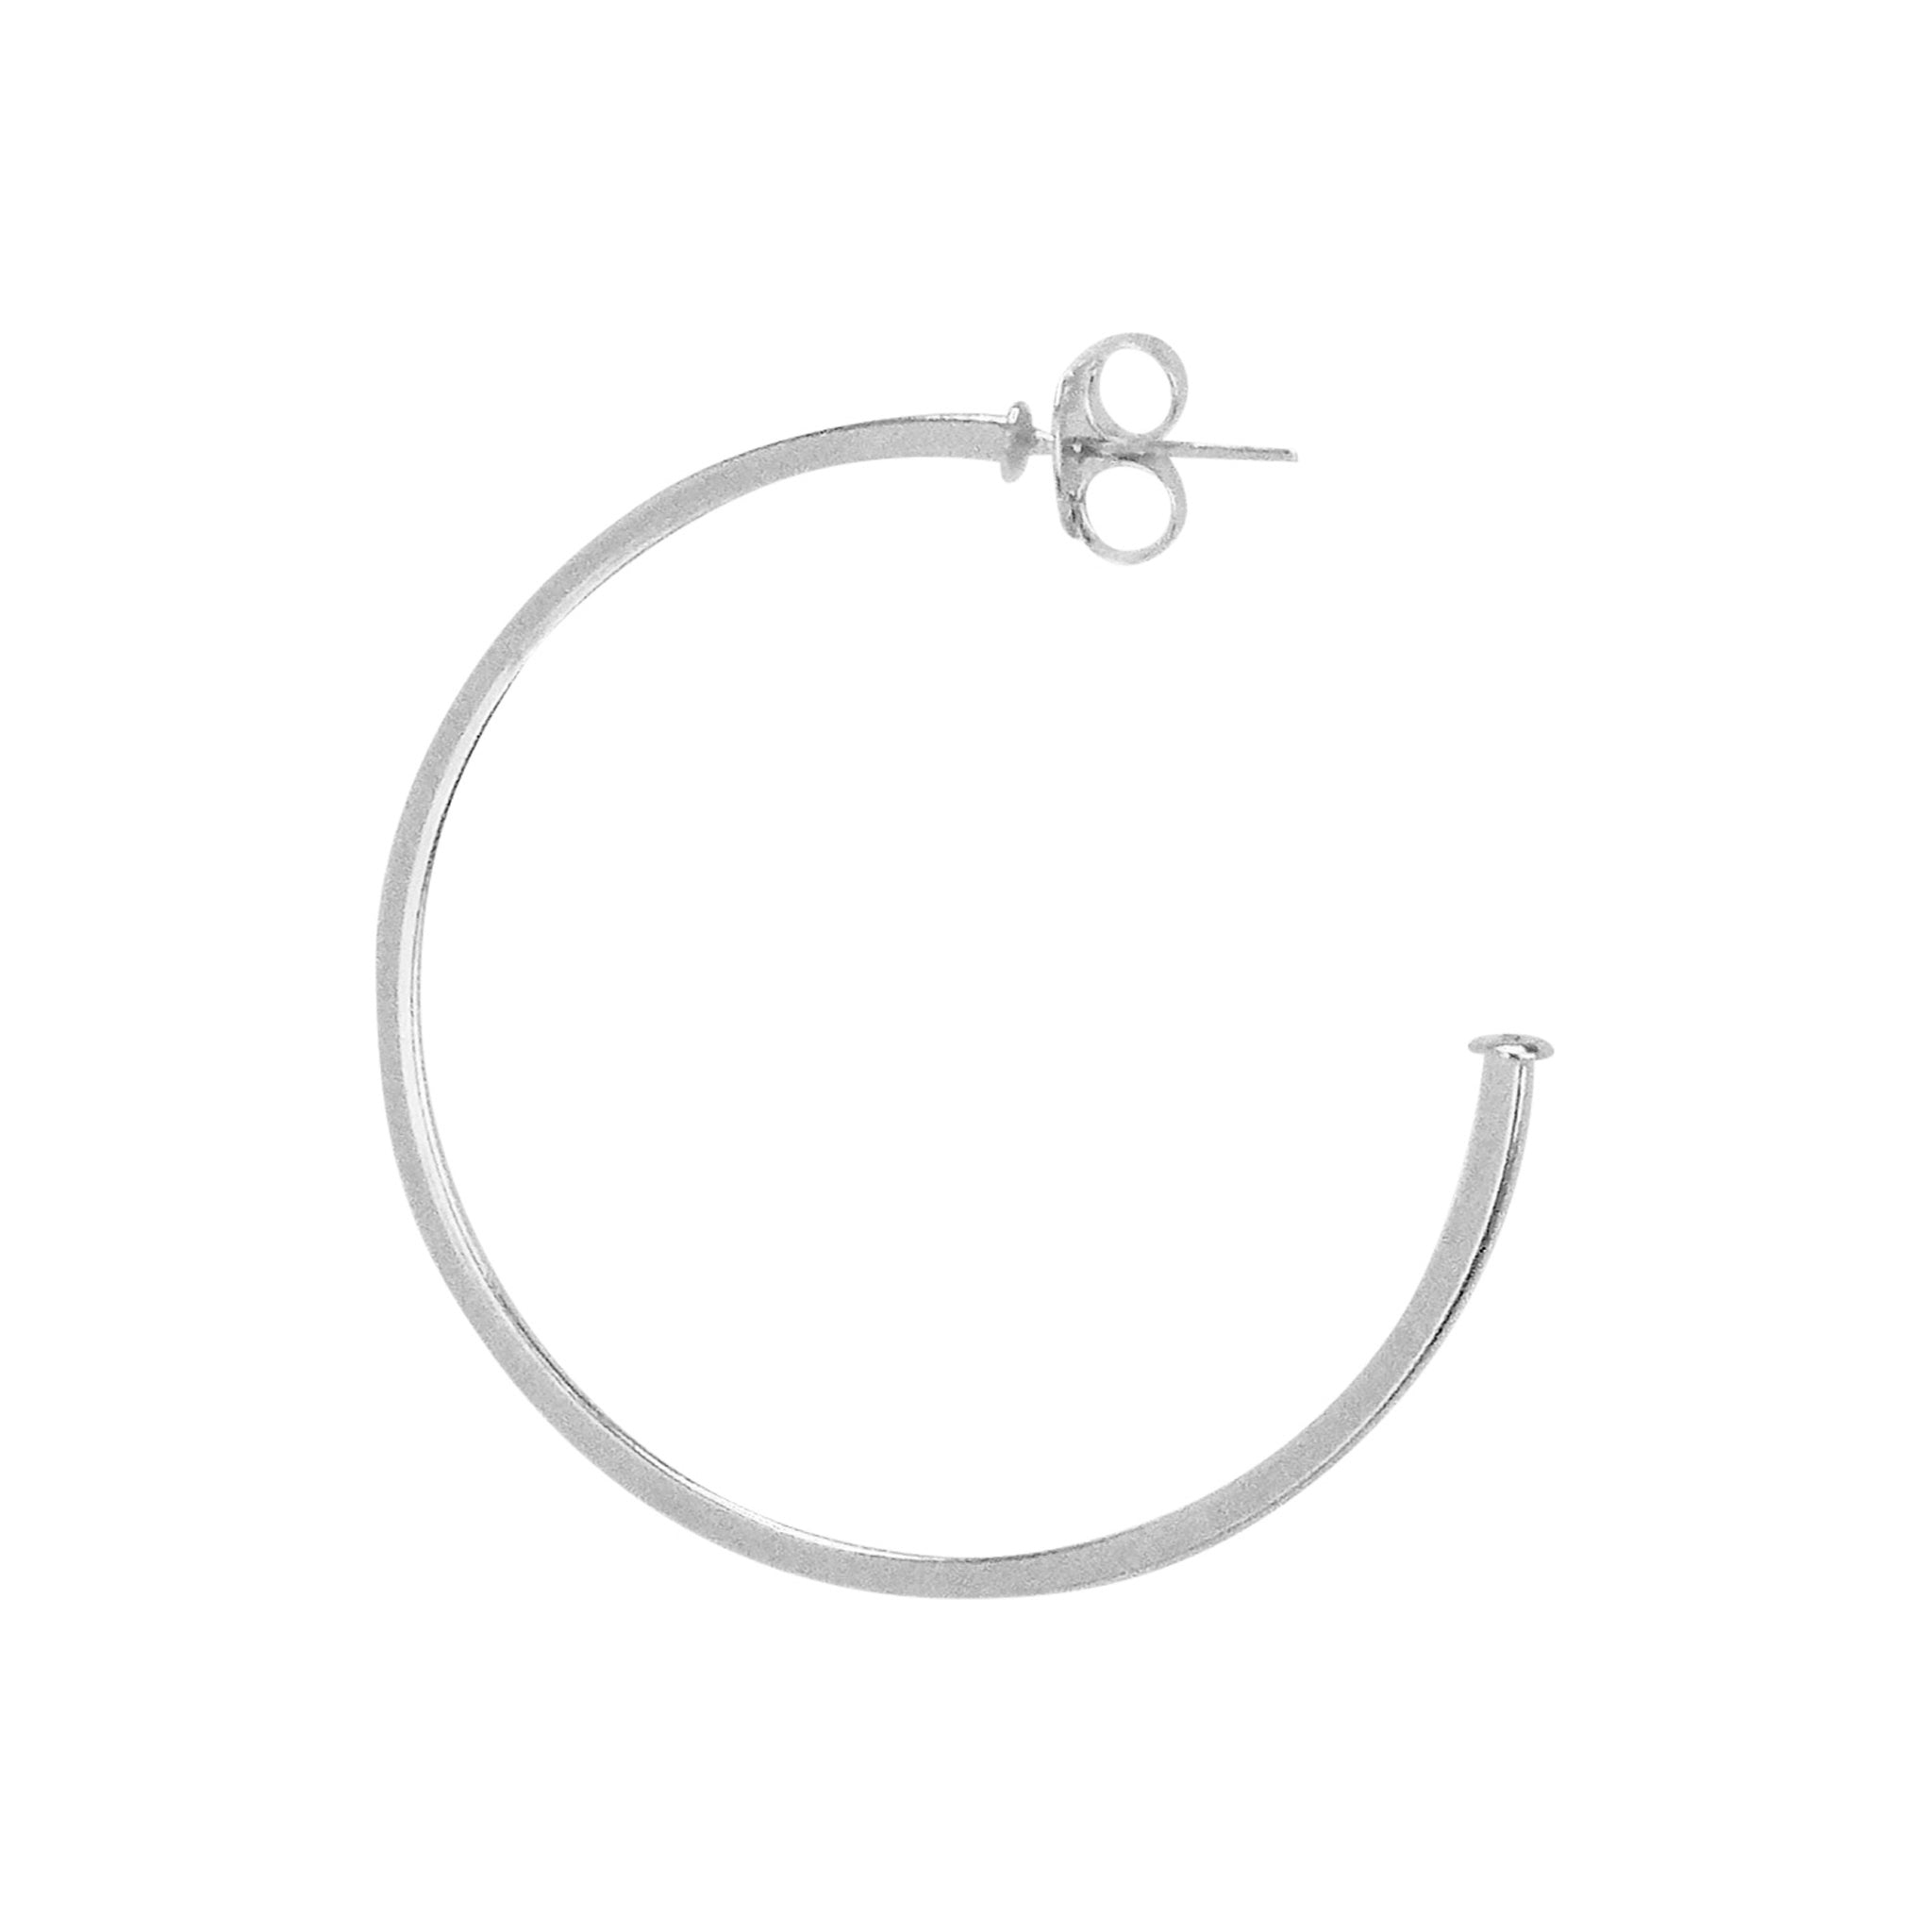 side image of Sheila Fajl Perfect Hoop Earrings in Polished Silver Plated